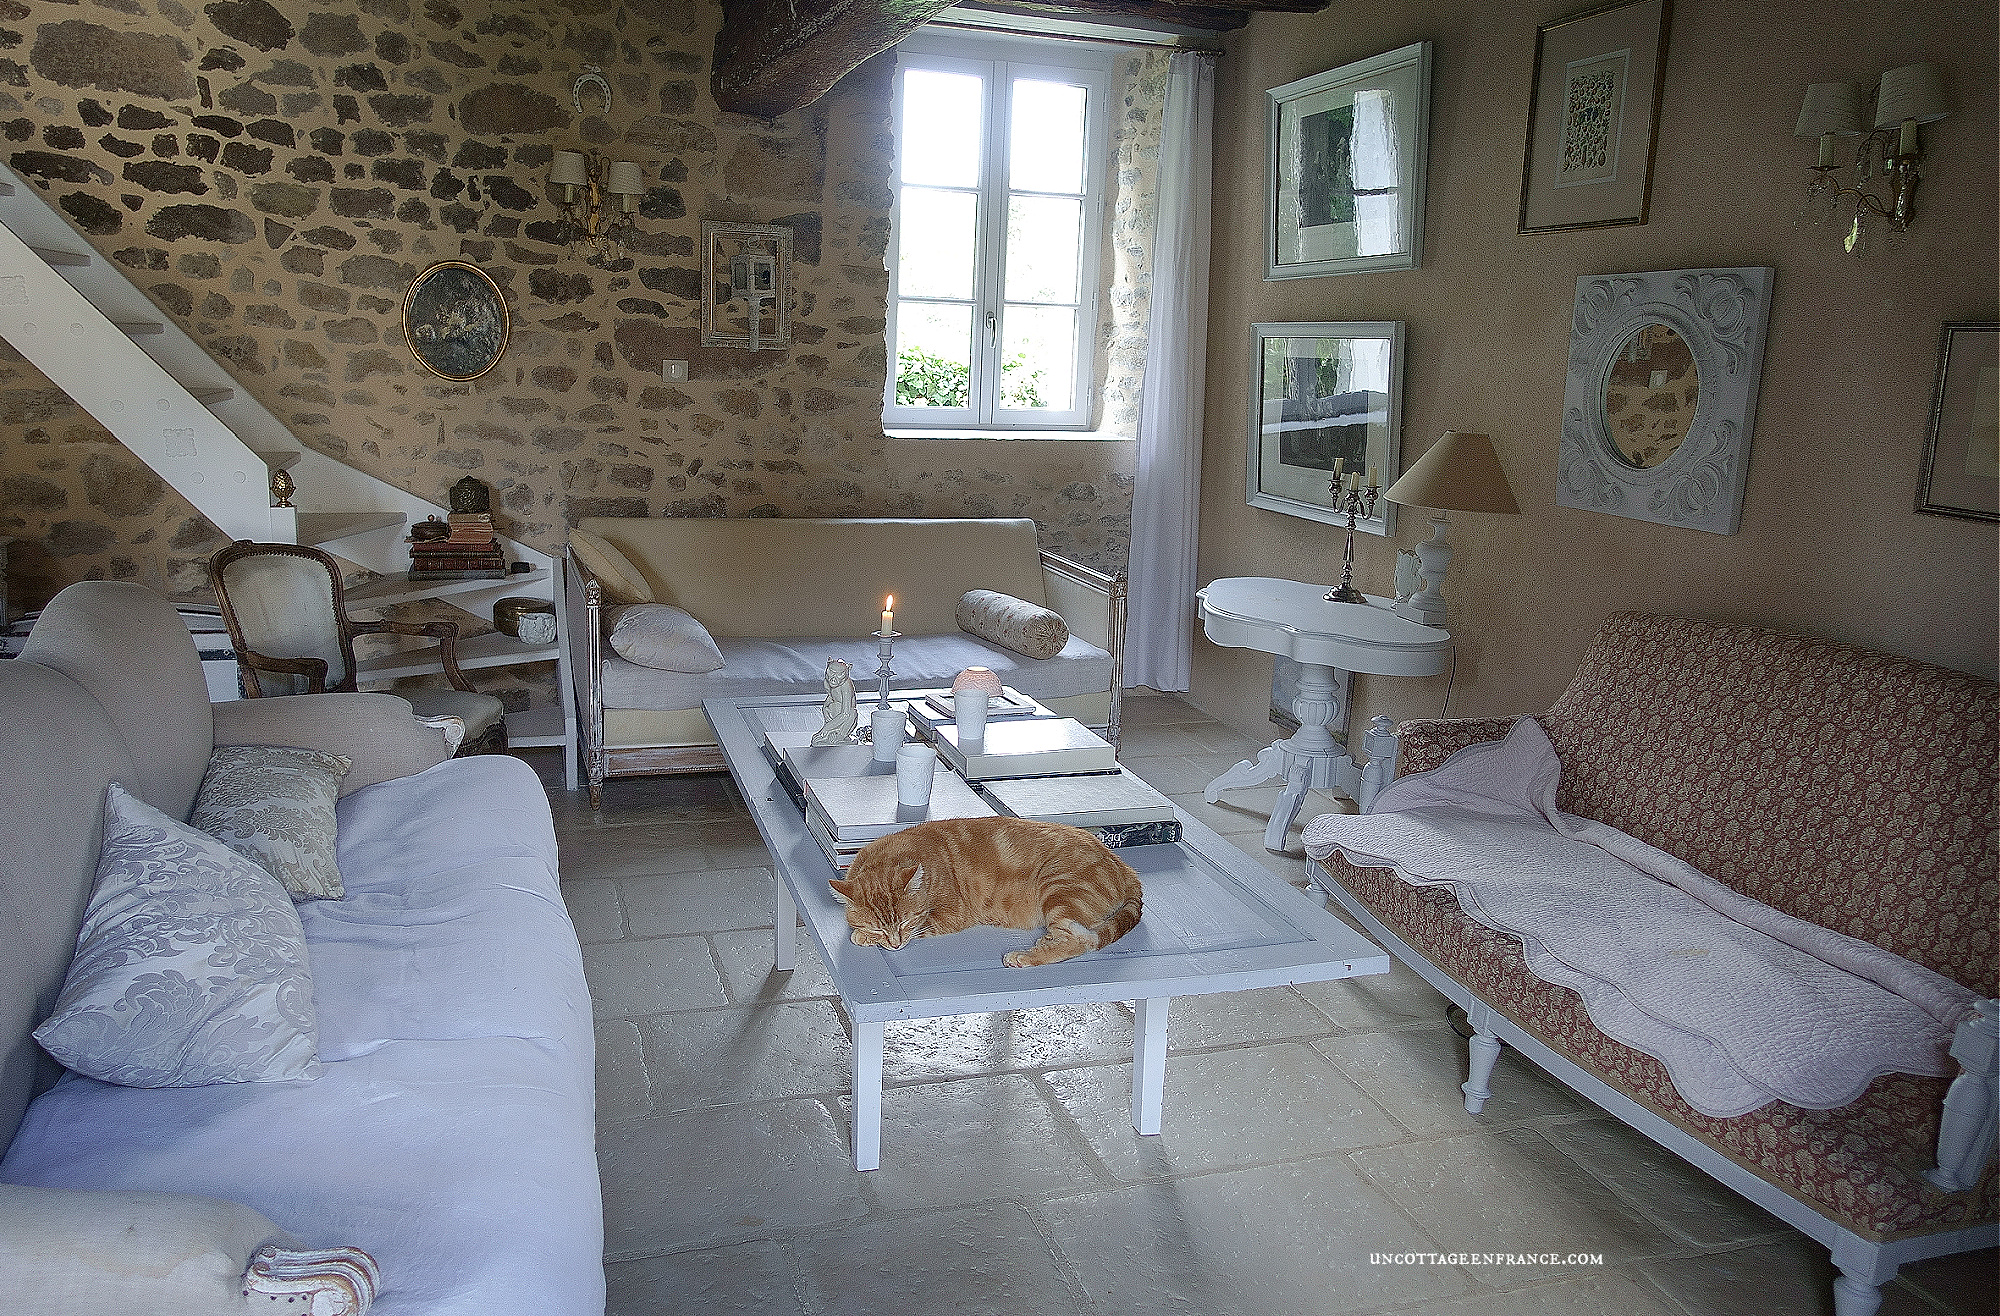 #whitecottagecharm #uncottageenfrance #campagnechic #frenchinterior #frenchfarmhousestyle #frenchcountry #frenchliving #fixerupperstyle #frenchcountrycottage #allthingsfrench #frenchcottage #farmhousevignette #cottagevignette #chippypaint #frenchdecoration #fermette #countrychic #rustique #rusticdecor #decorustic #cottagedecor #maisondecampagne #campagnedecoration #countryhomemag #brocante #monochromehome #greycottage #frenchgrey #gristendre #grischic